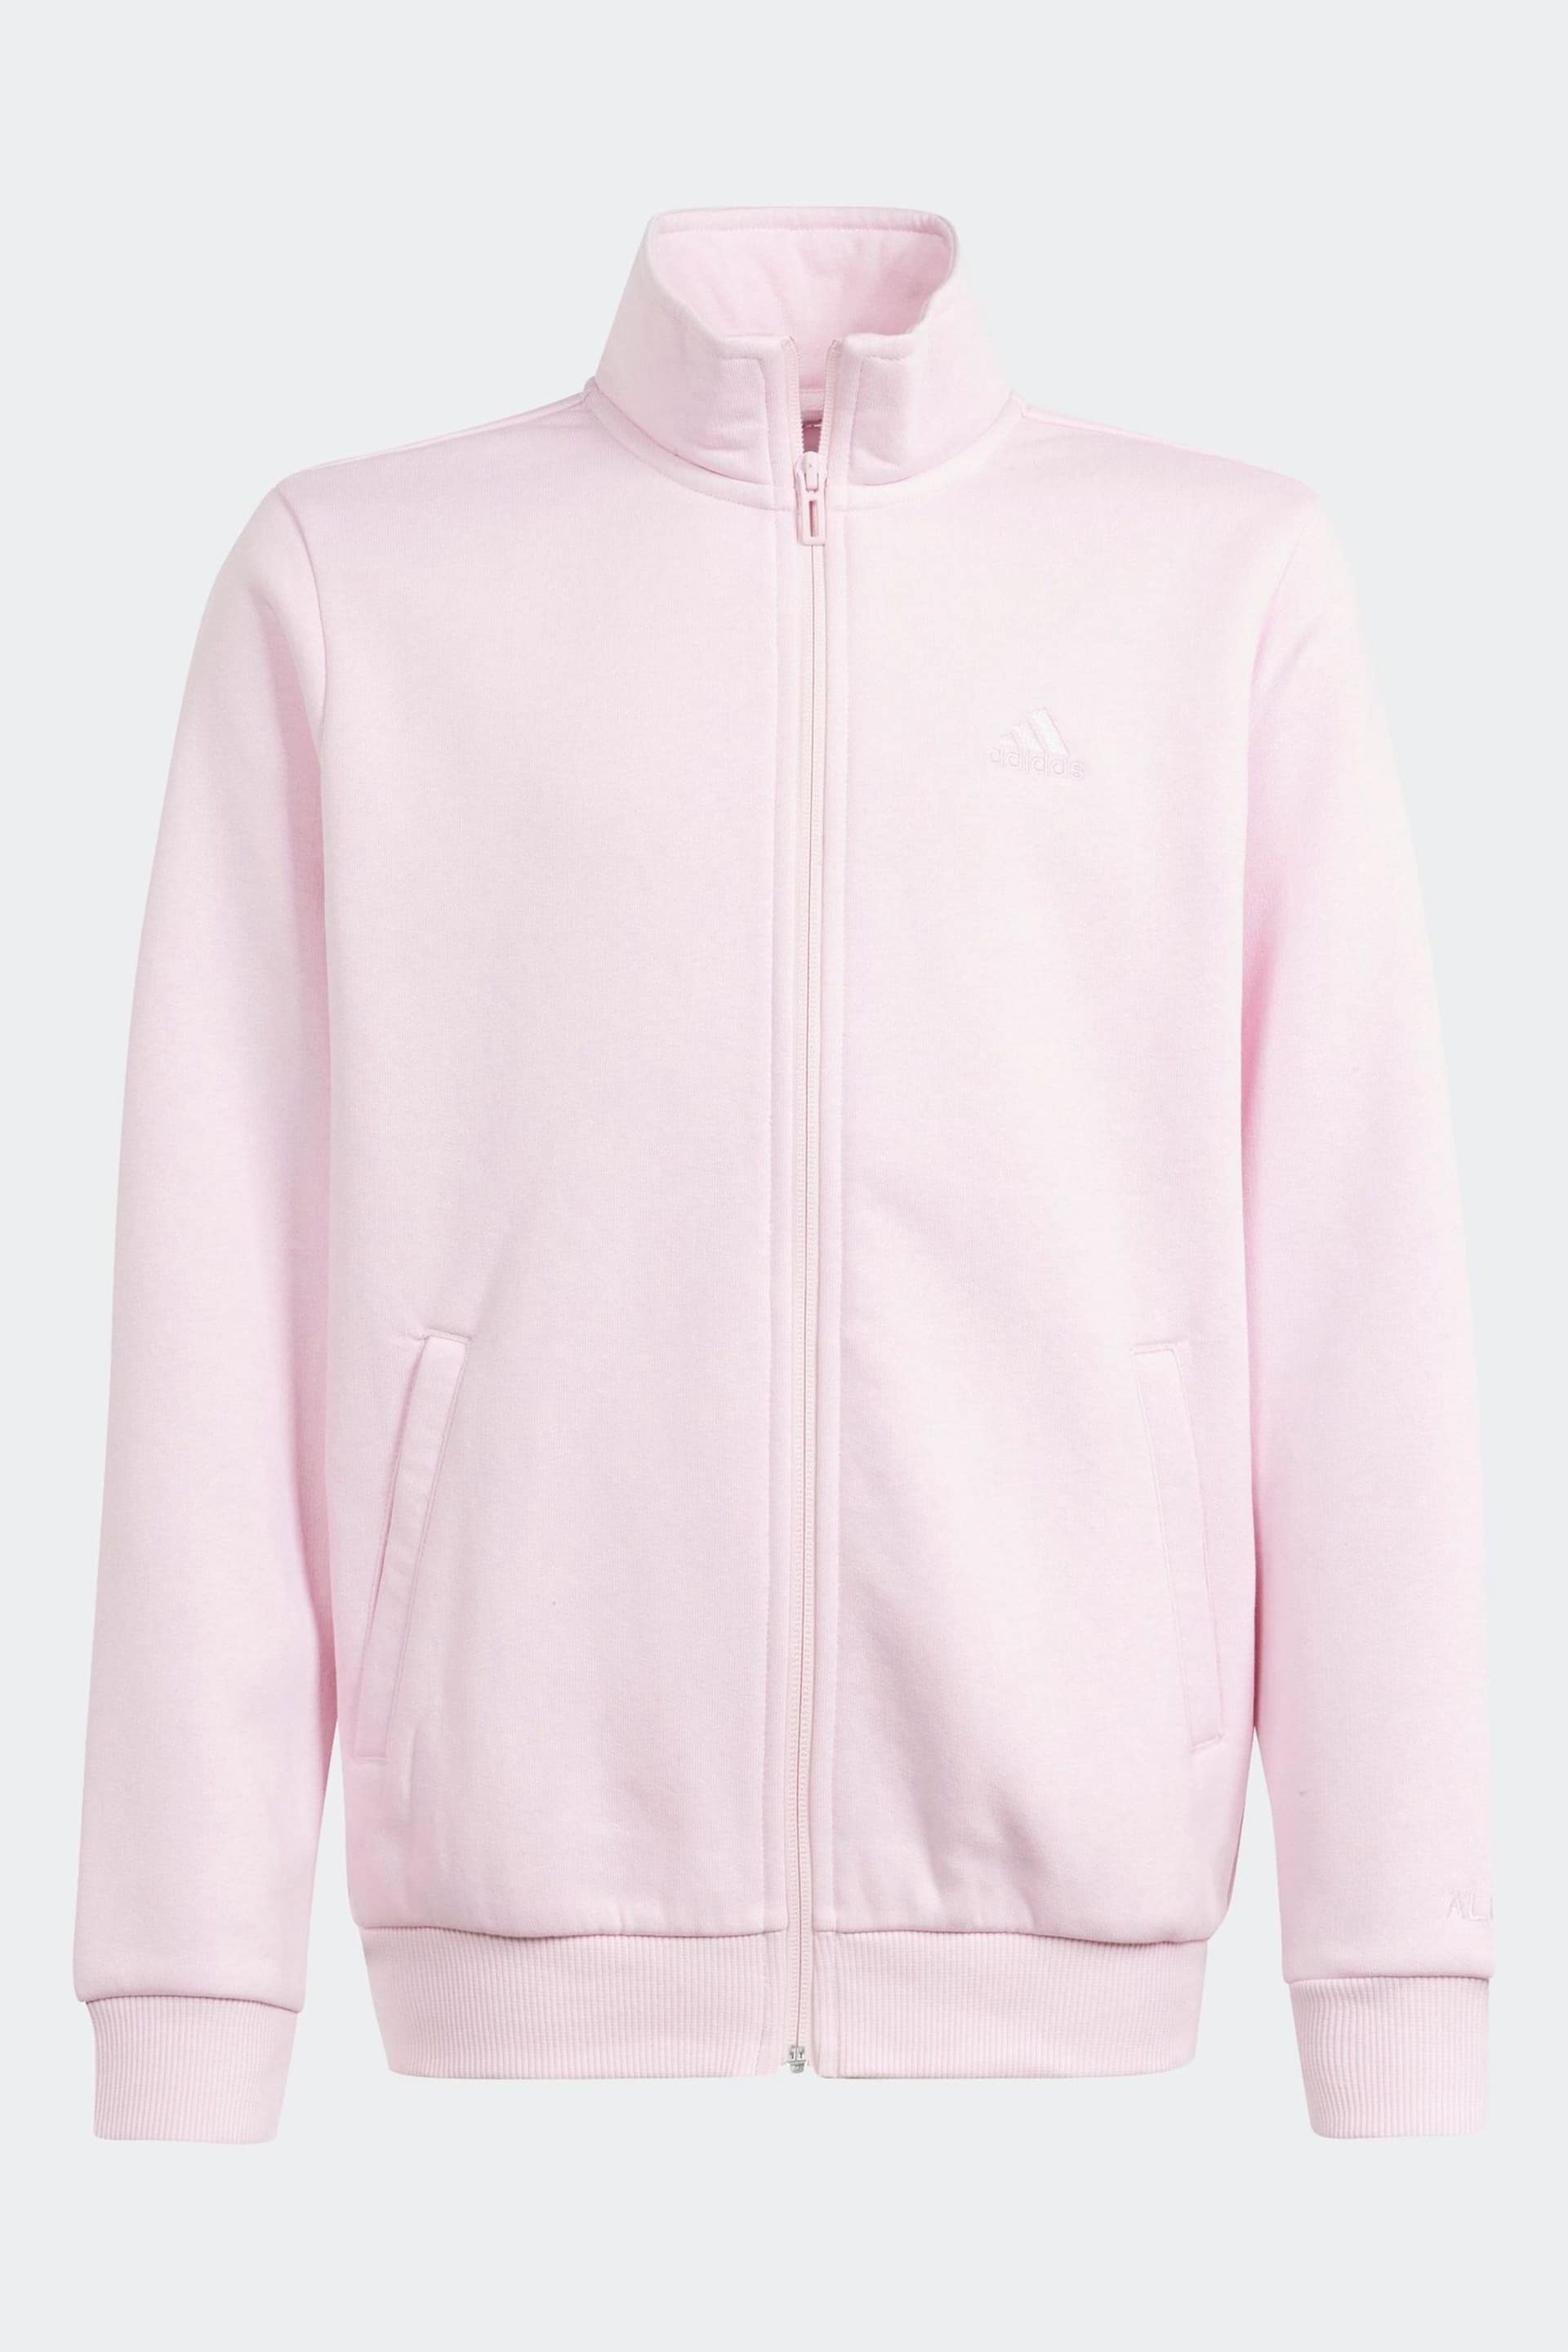 adidas Pink Kids Sportswear All Szn Graphic Tracksuit - Image 3 of 6